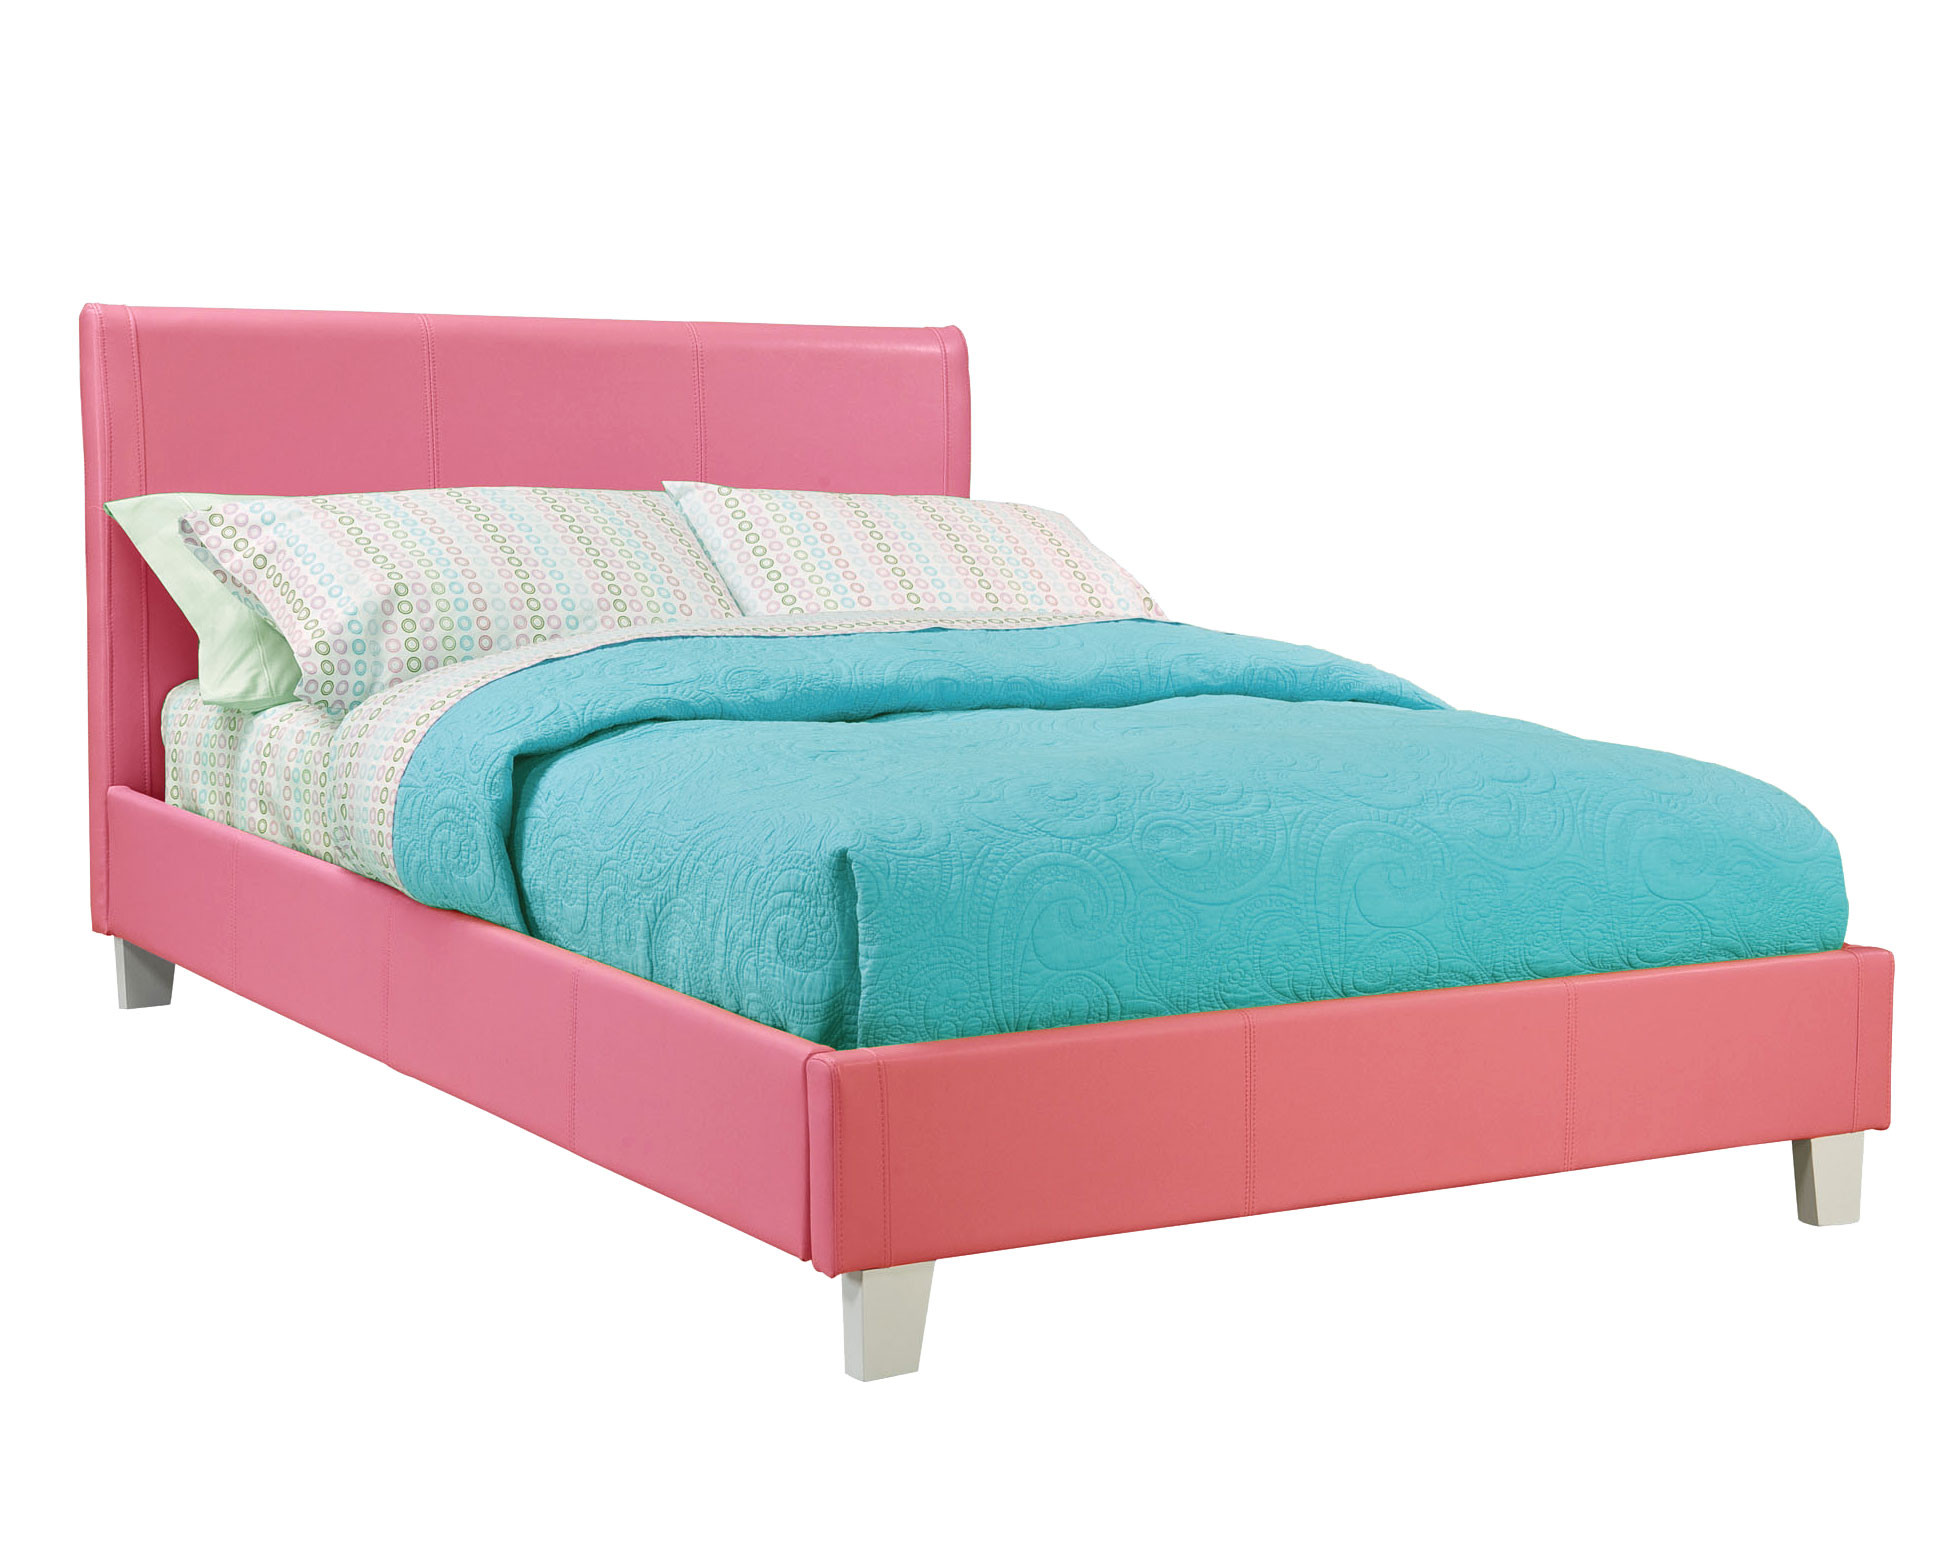 Discount Kids Beds & Bunk Beds | American Freight